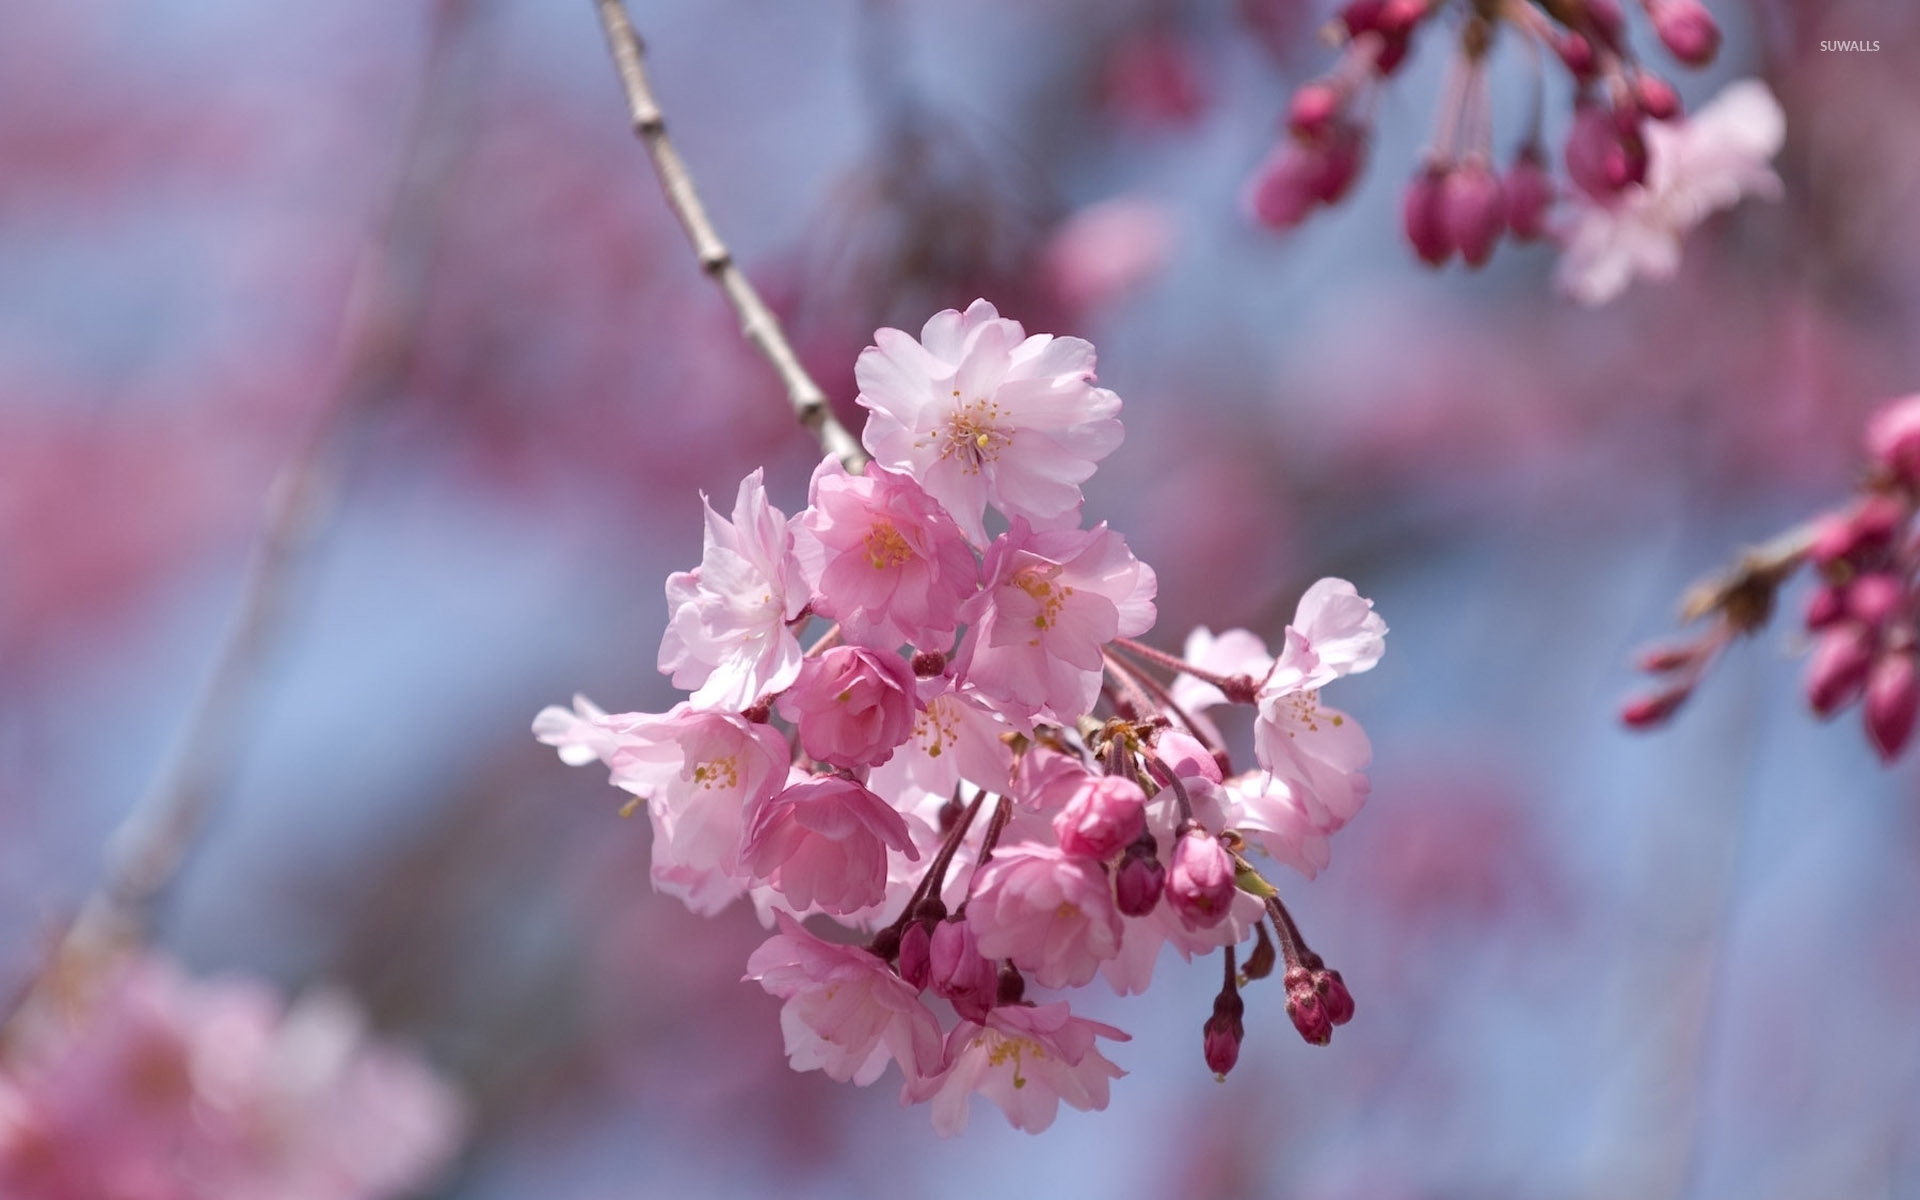 Pink cherry blossoms in a spring tree wallpaper - Flower wallpapers